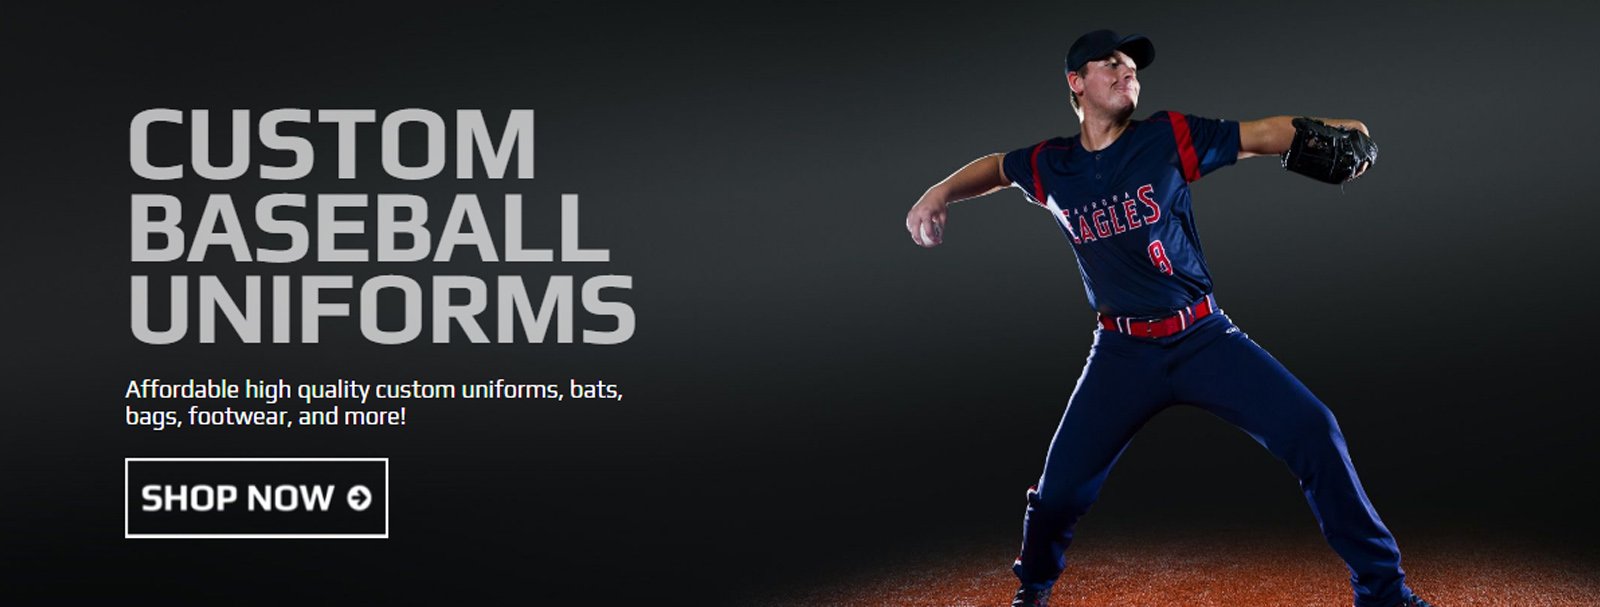 Things To Consider Before Ordering Your Baseball Uniforms.